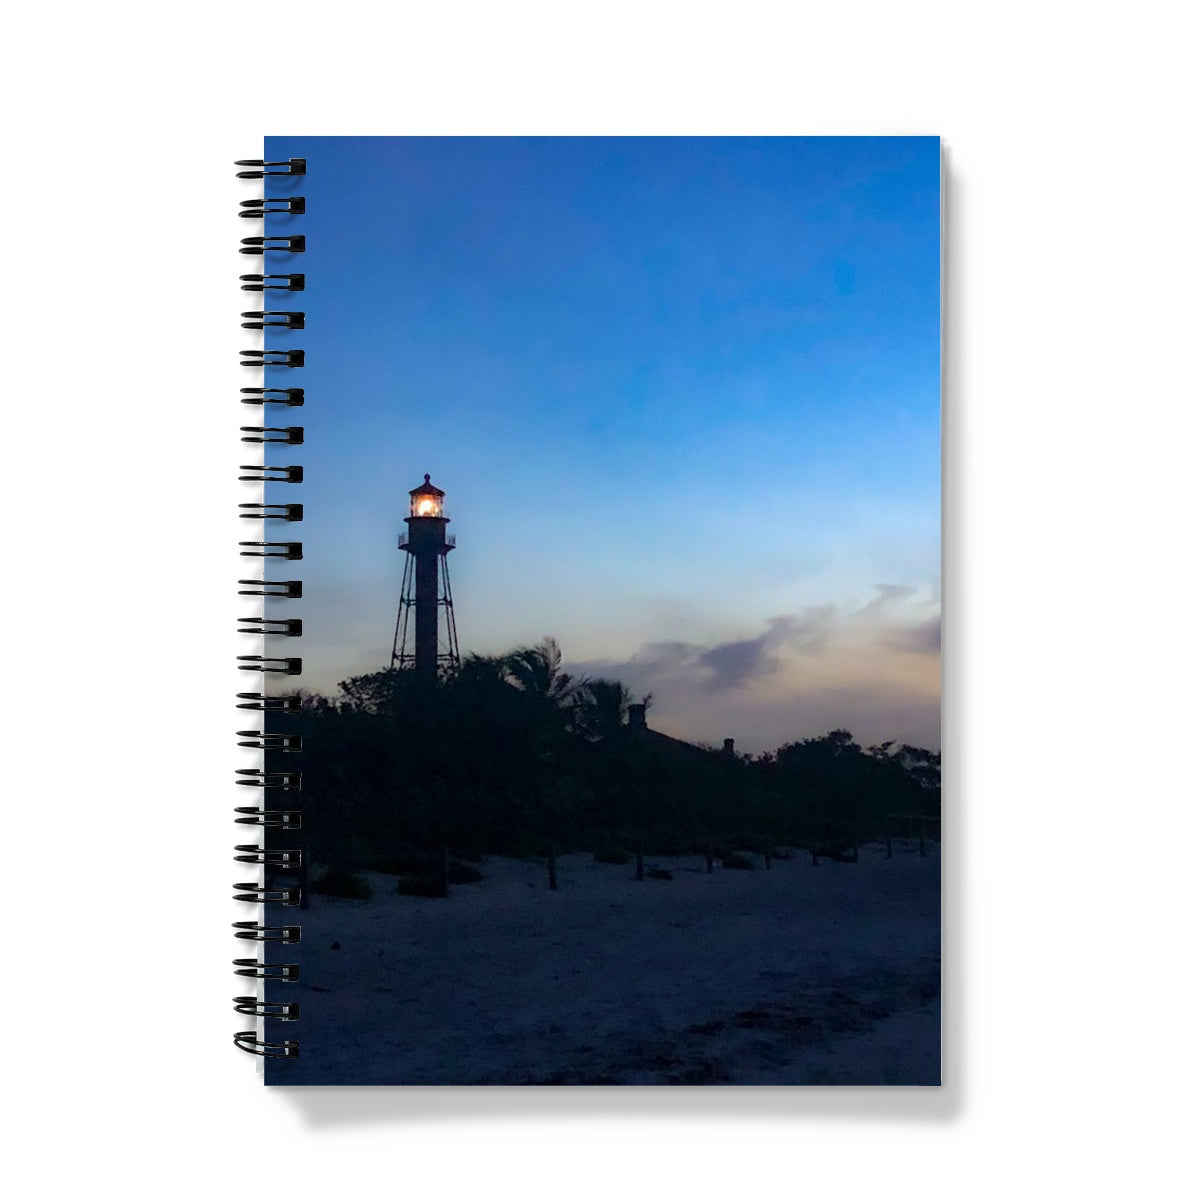 8x11 spiral bound lined notebook by jacqueline mb designs 